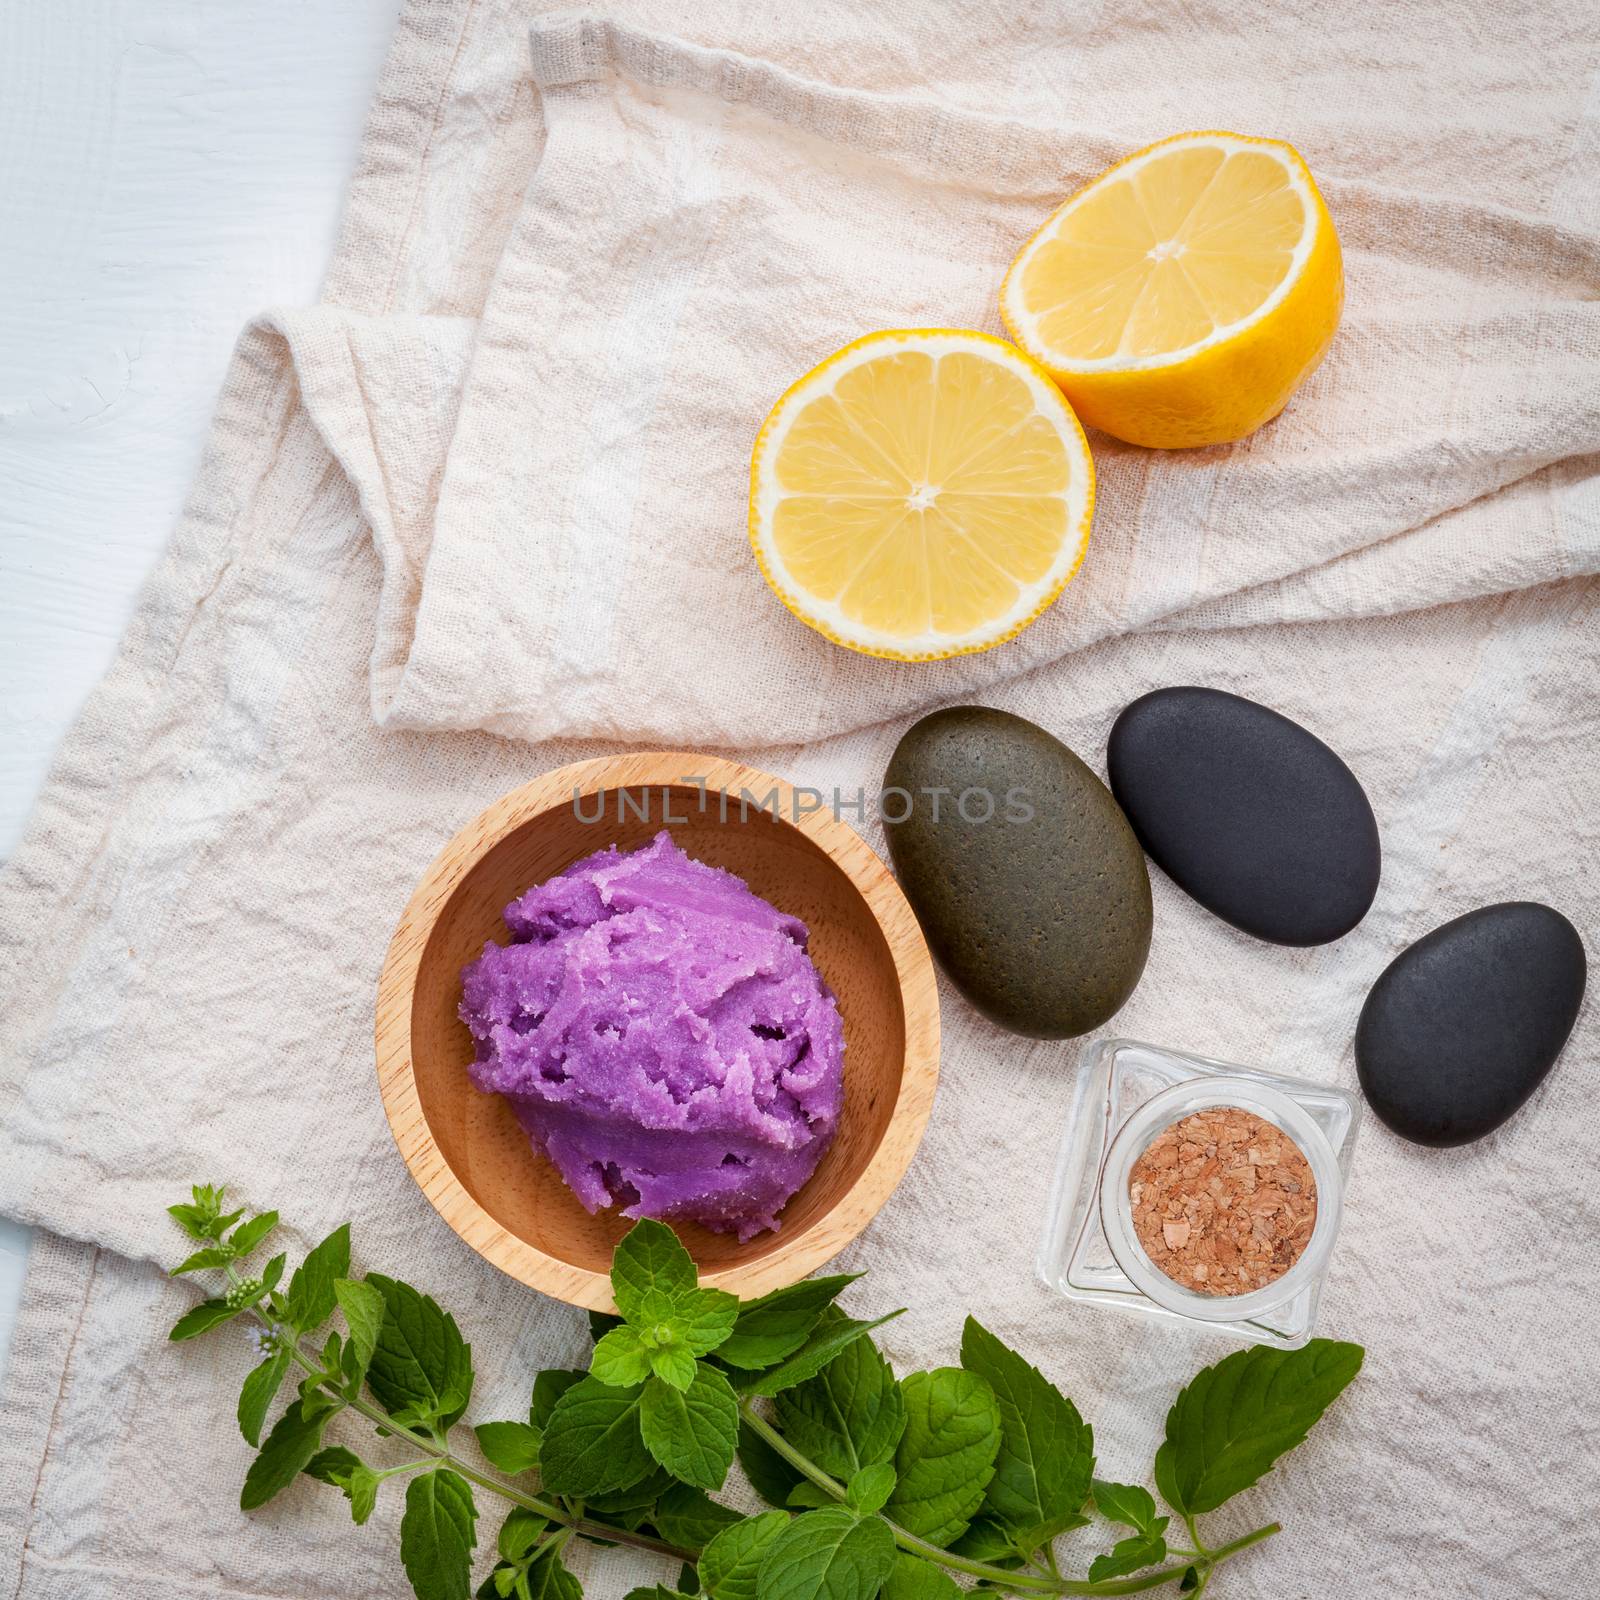 Alternative skin care lavender scrubs with natural ingredients lemon slice ,peppermint and aromatic oils set up on white wooden background with flat lay.